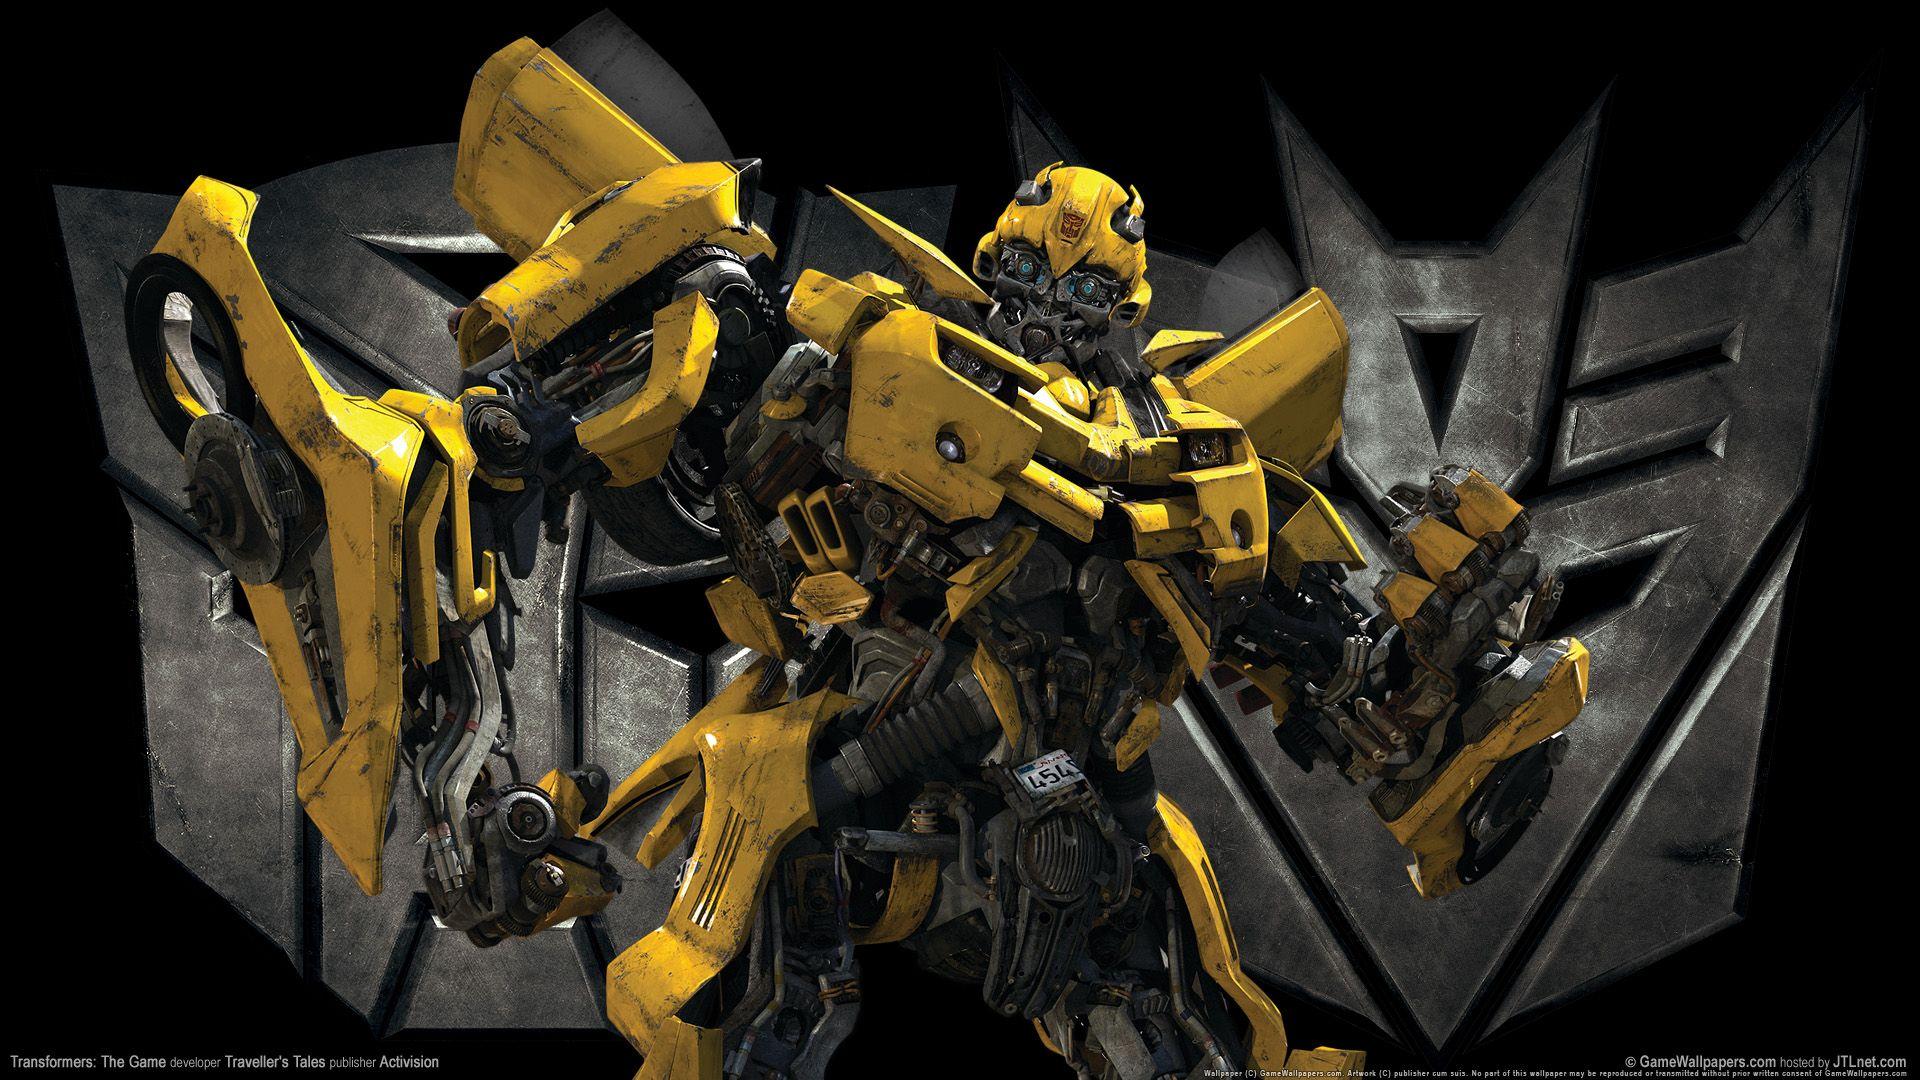 Bumble Bee # 1920x1200. All For Desktop